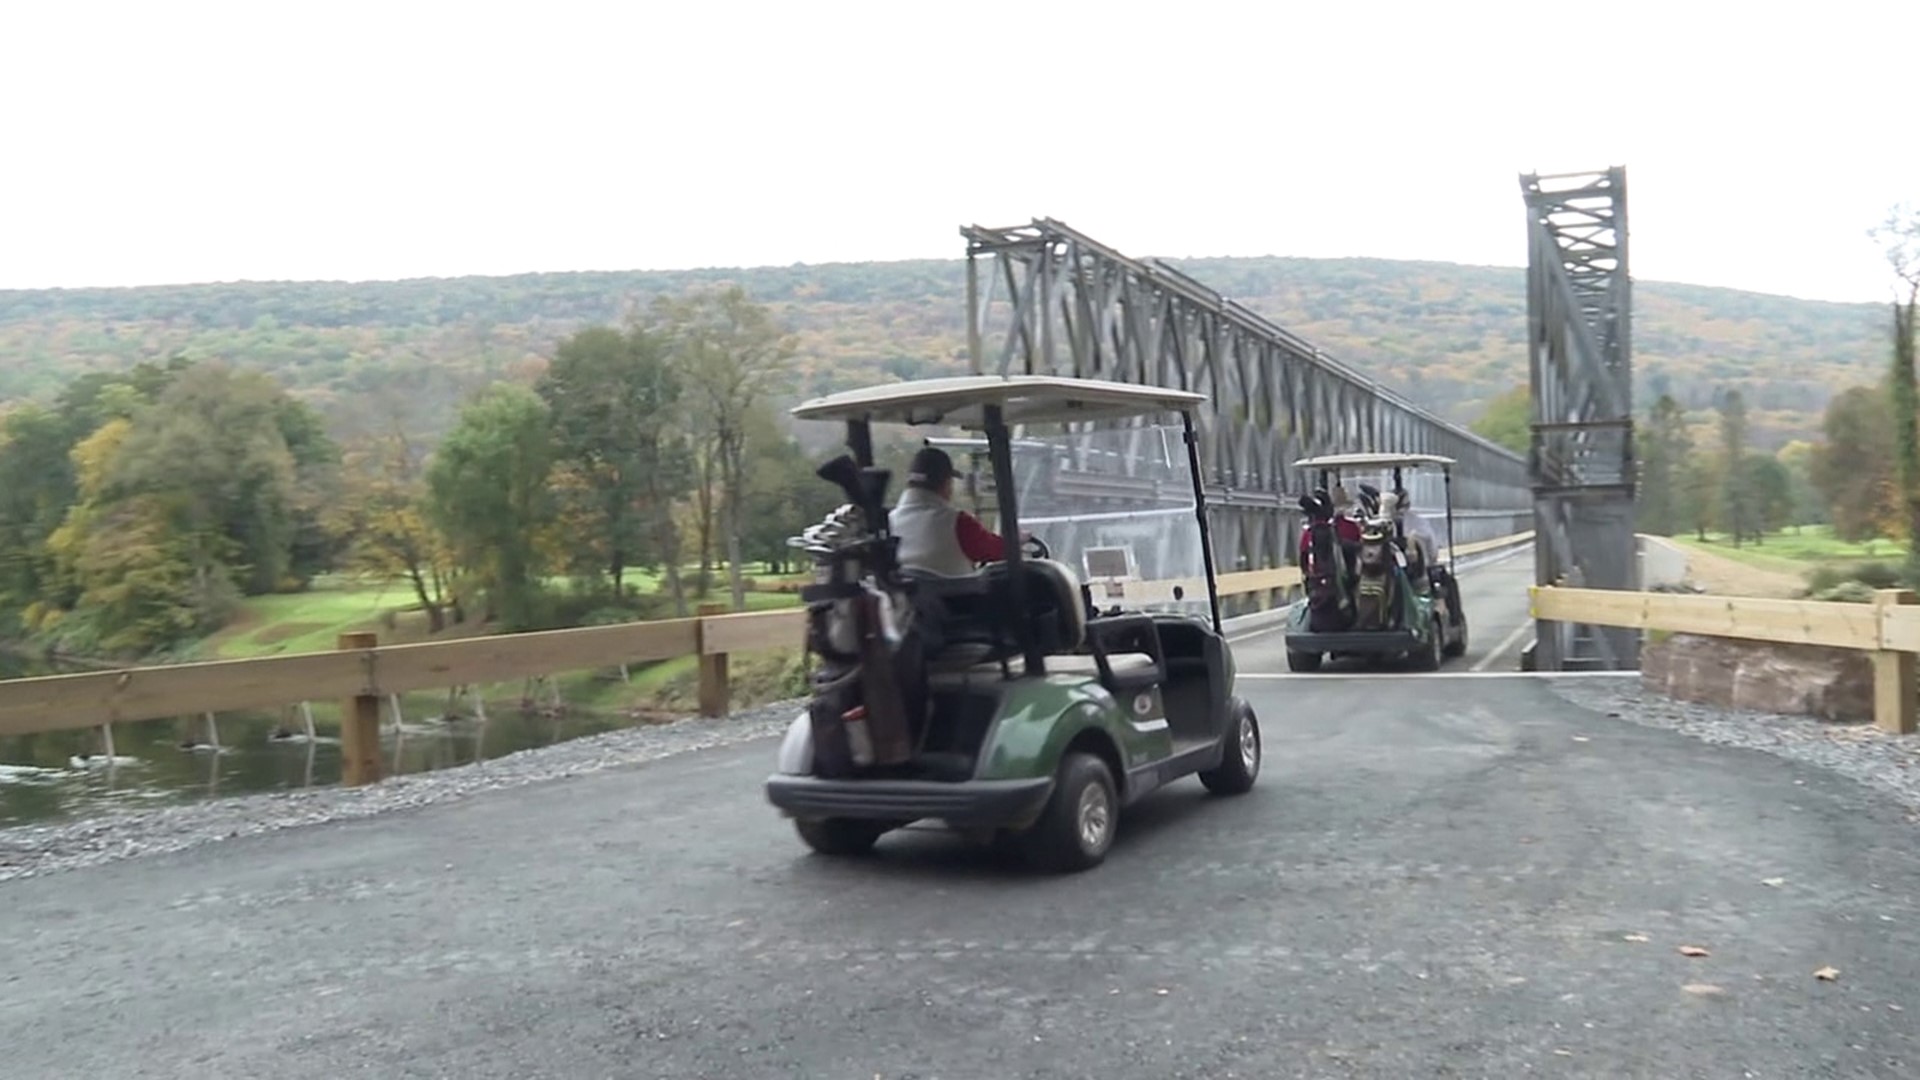 Golfers now have a new bridge to connect them to the links at Shawnee Inn and Golf Resort.